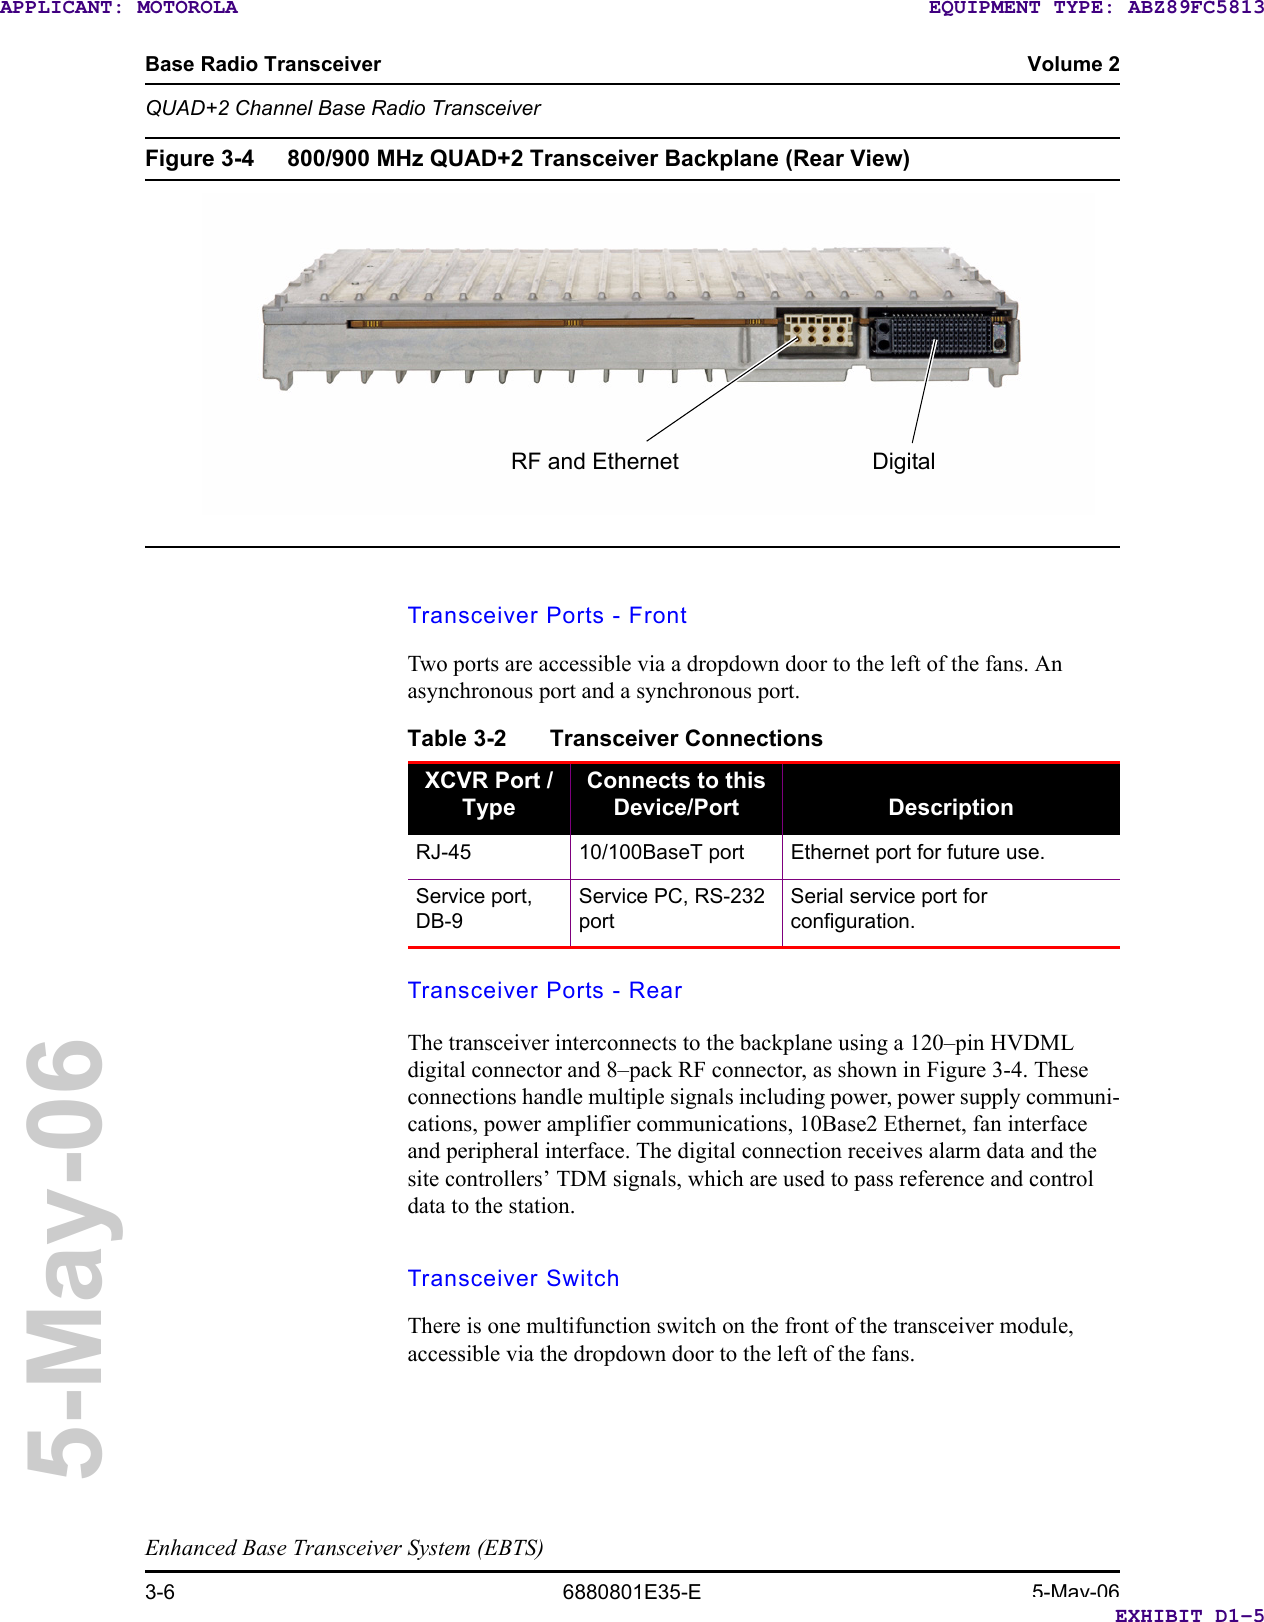 Base Radio Transceiver Volume 2QUAD+2 Channel Base Radio TransceiverEnhanced Base Transceiver System (EBTS)3-6 6880801E35-E 5-May-065-May-06Figure 3-4 800/900 MHz QUAD+2 Transceiver Backplane (Rear View) Transceiver Ports - FrontTwo ports are accessible via a dropdown door to the left of the fans. An asynchronous port and a synchronous port.Transceiver Ports - RearThe transceiver interconnects to the backplane using a 120–pin HVDML digital connector and 8–pack RF connector, as shown in Figure 3-4. These connections handle multiple signals including power, power supply communi-cations, power amplifier communications, 10Base2 Ethernet, fan interface and peripheral interface. The digital connection receives alarm data and the site controllers’ TDM signals, which are used to pass reference and control data to the station.Transceiver SwitchThere is one multifunction switch on the front of the transceiver module, accessible via the dropdown door to the left of the fans.RF and Ethernet DigitalTable 3-2 Transceiver ConnectionsXCVR Port / TypeConnects to this Device/Port DescriptionRJ-45 10/100BaseT port Ethernet port for future use.Service port, DB-9Service PC, RS-232 portSerial service port for configuration.EXHIBIT D1-5EQUIPMENT TYPE: ABZ89FC5813APPLICANT: MOTOROLA